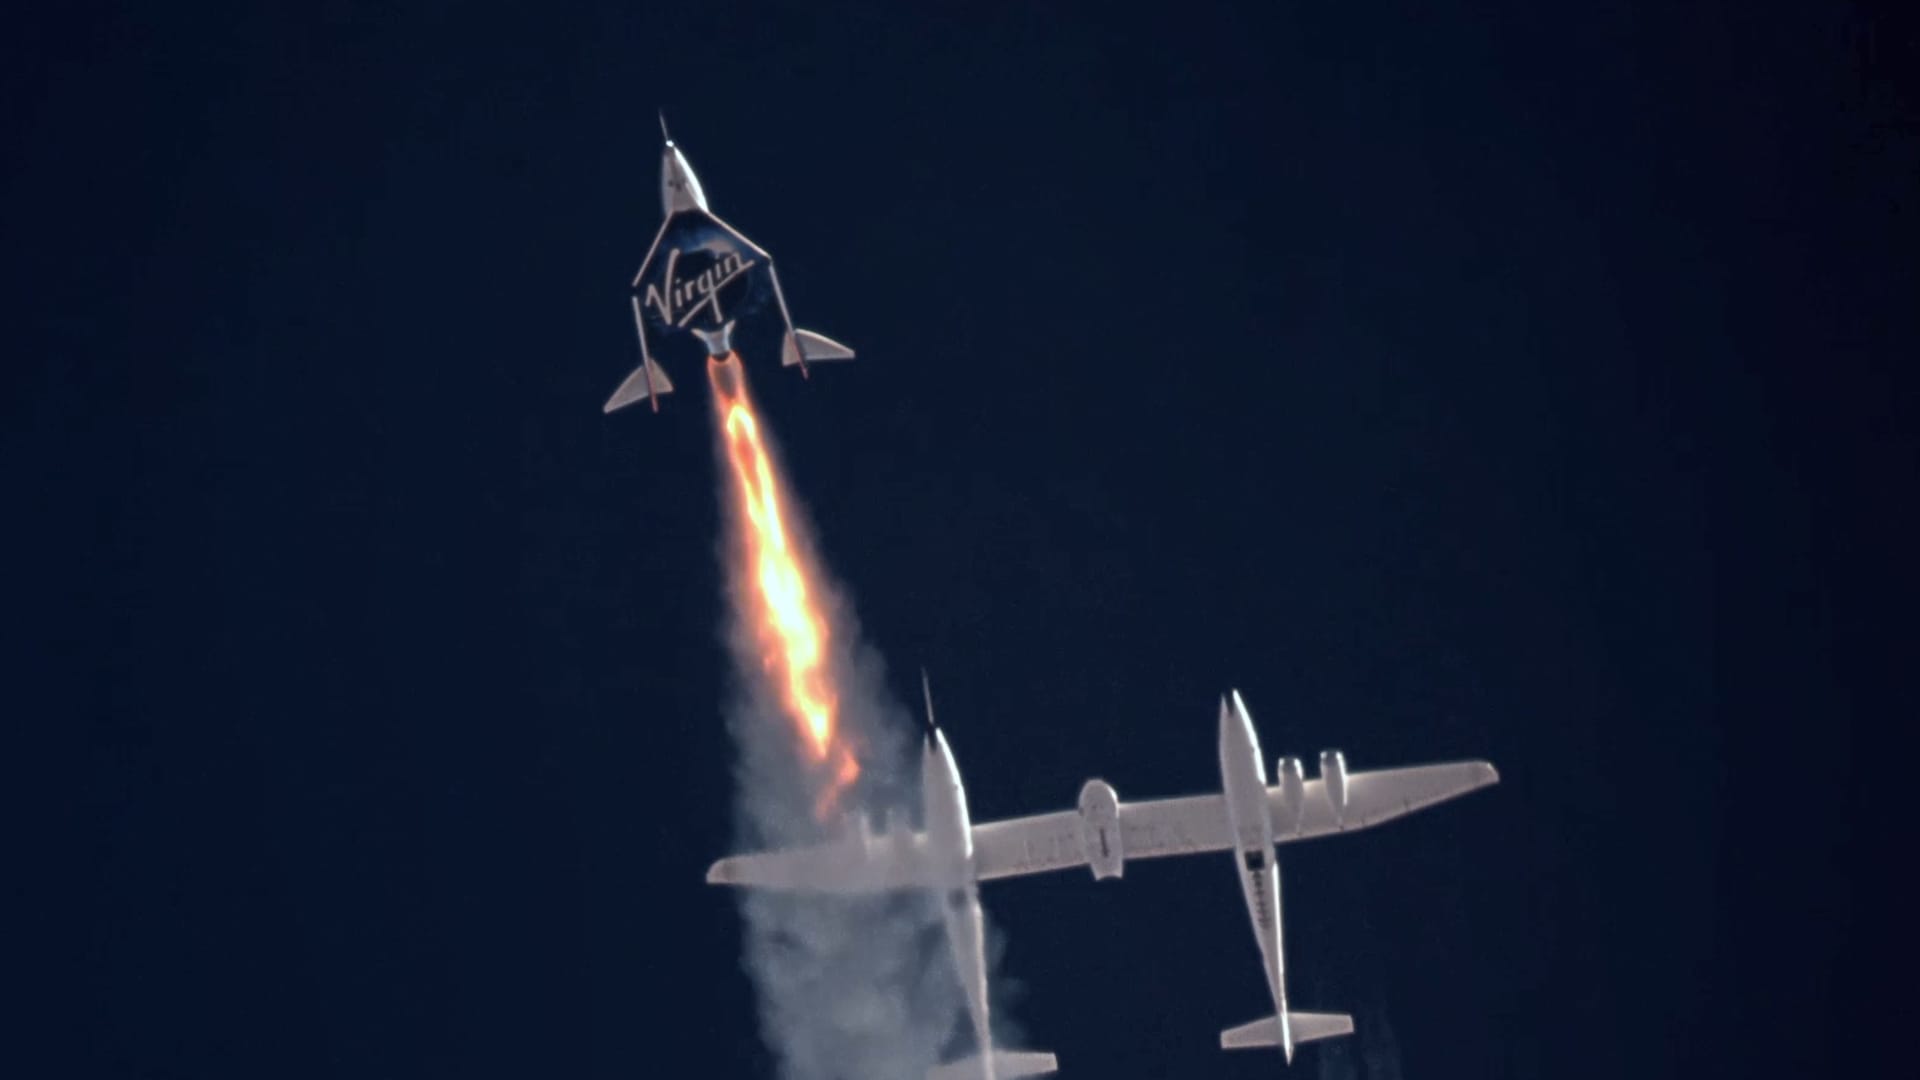 Carrier aircraft VMS Eve is seen in the background shortly after releasing VSS Unity, which is firing its engine and acclerating during the company's fourth spaceflight test, Unity 22, carrying founder Richard Branson on July 11, 2021.